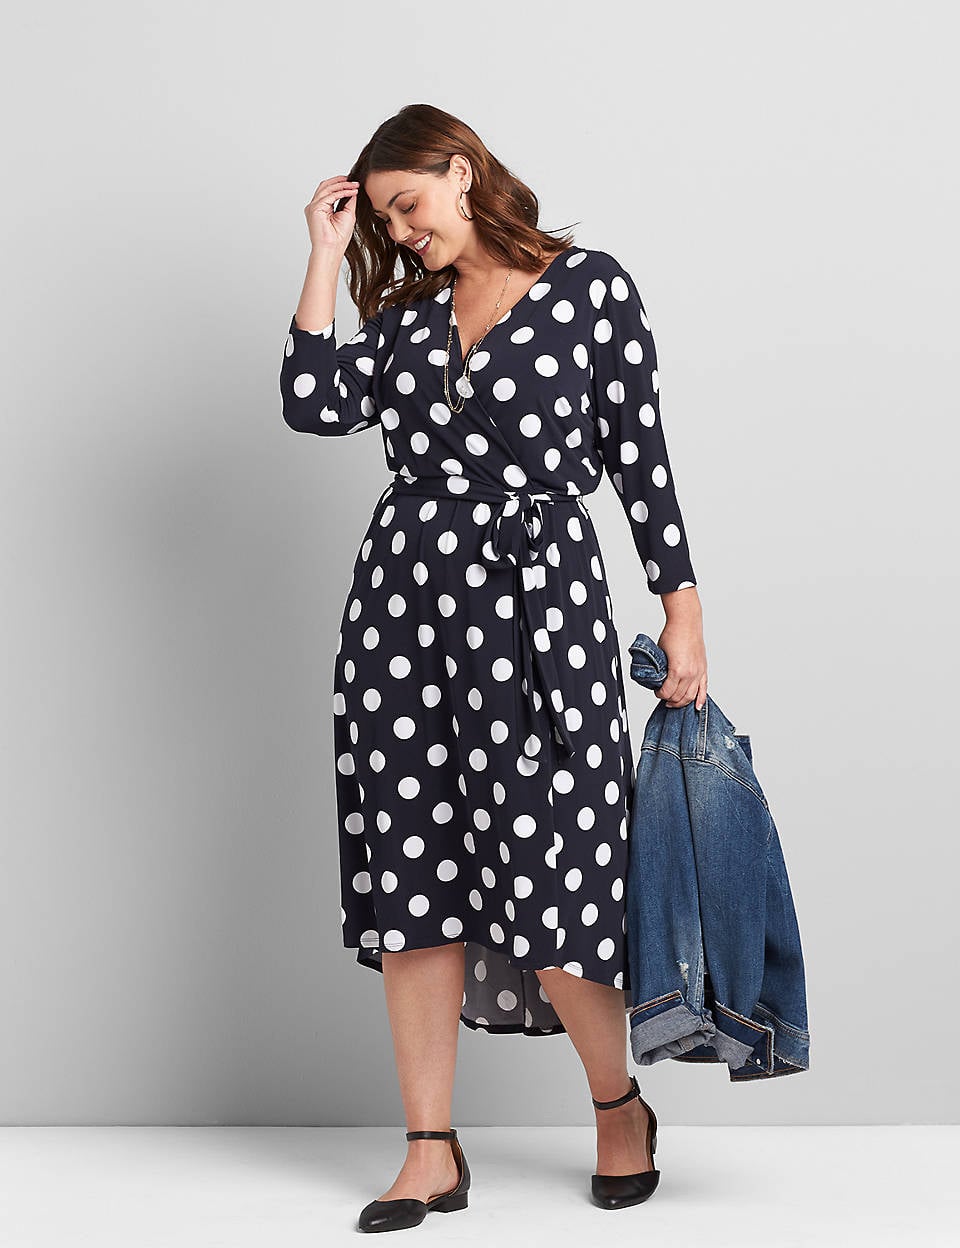 Chic Plus Size Black and White Polka Dot Outfit with the Gucci